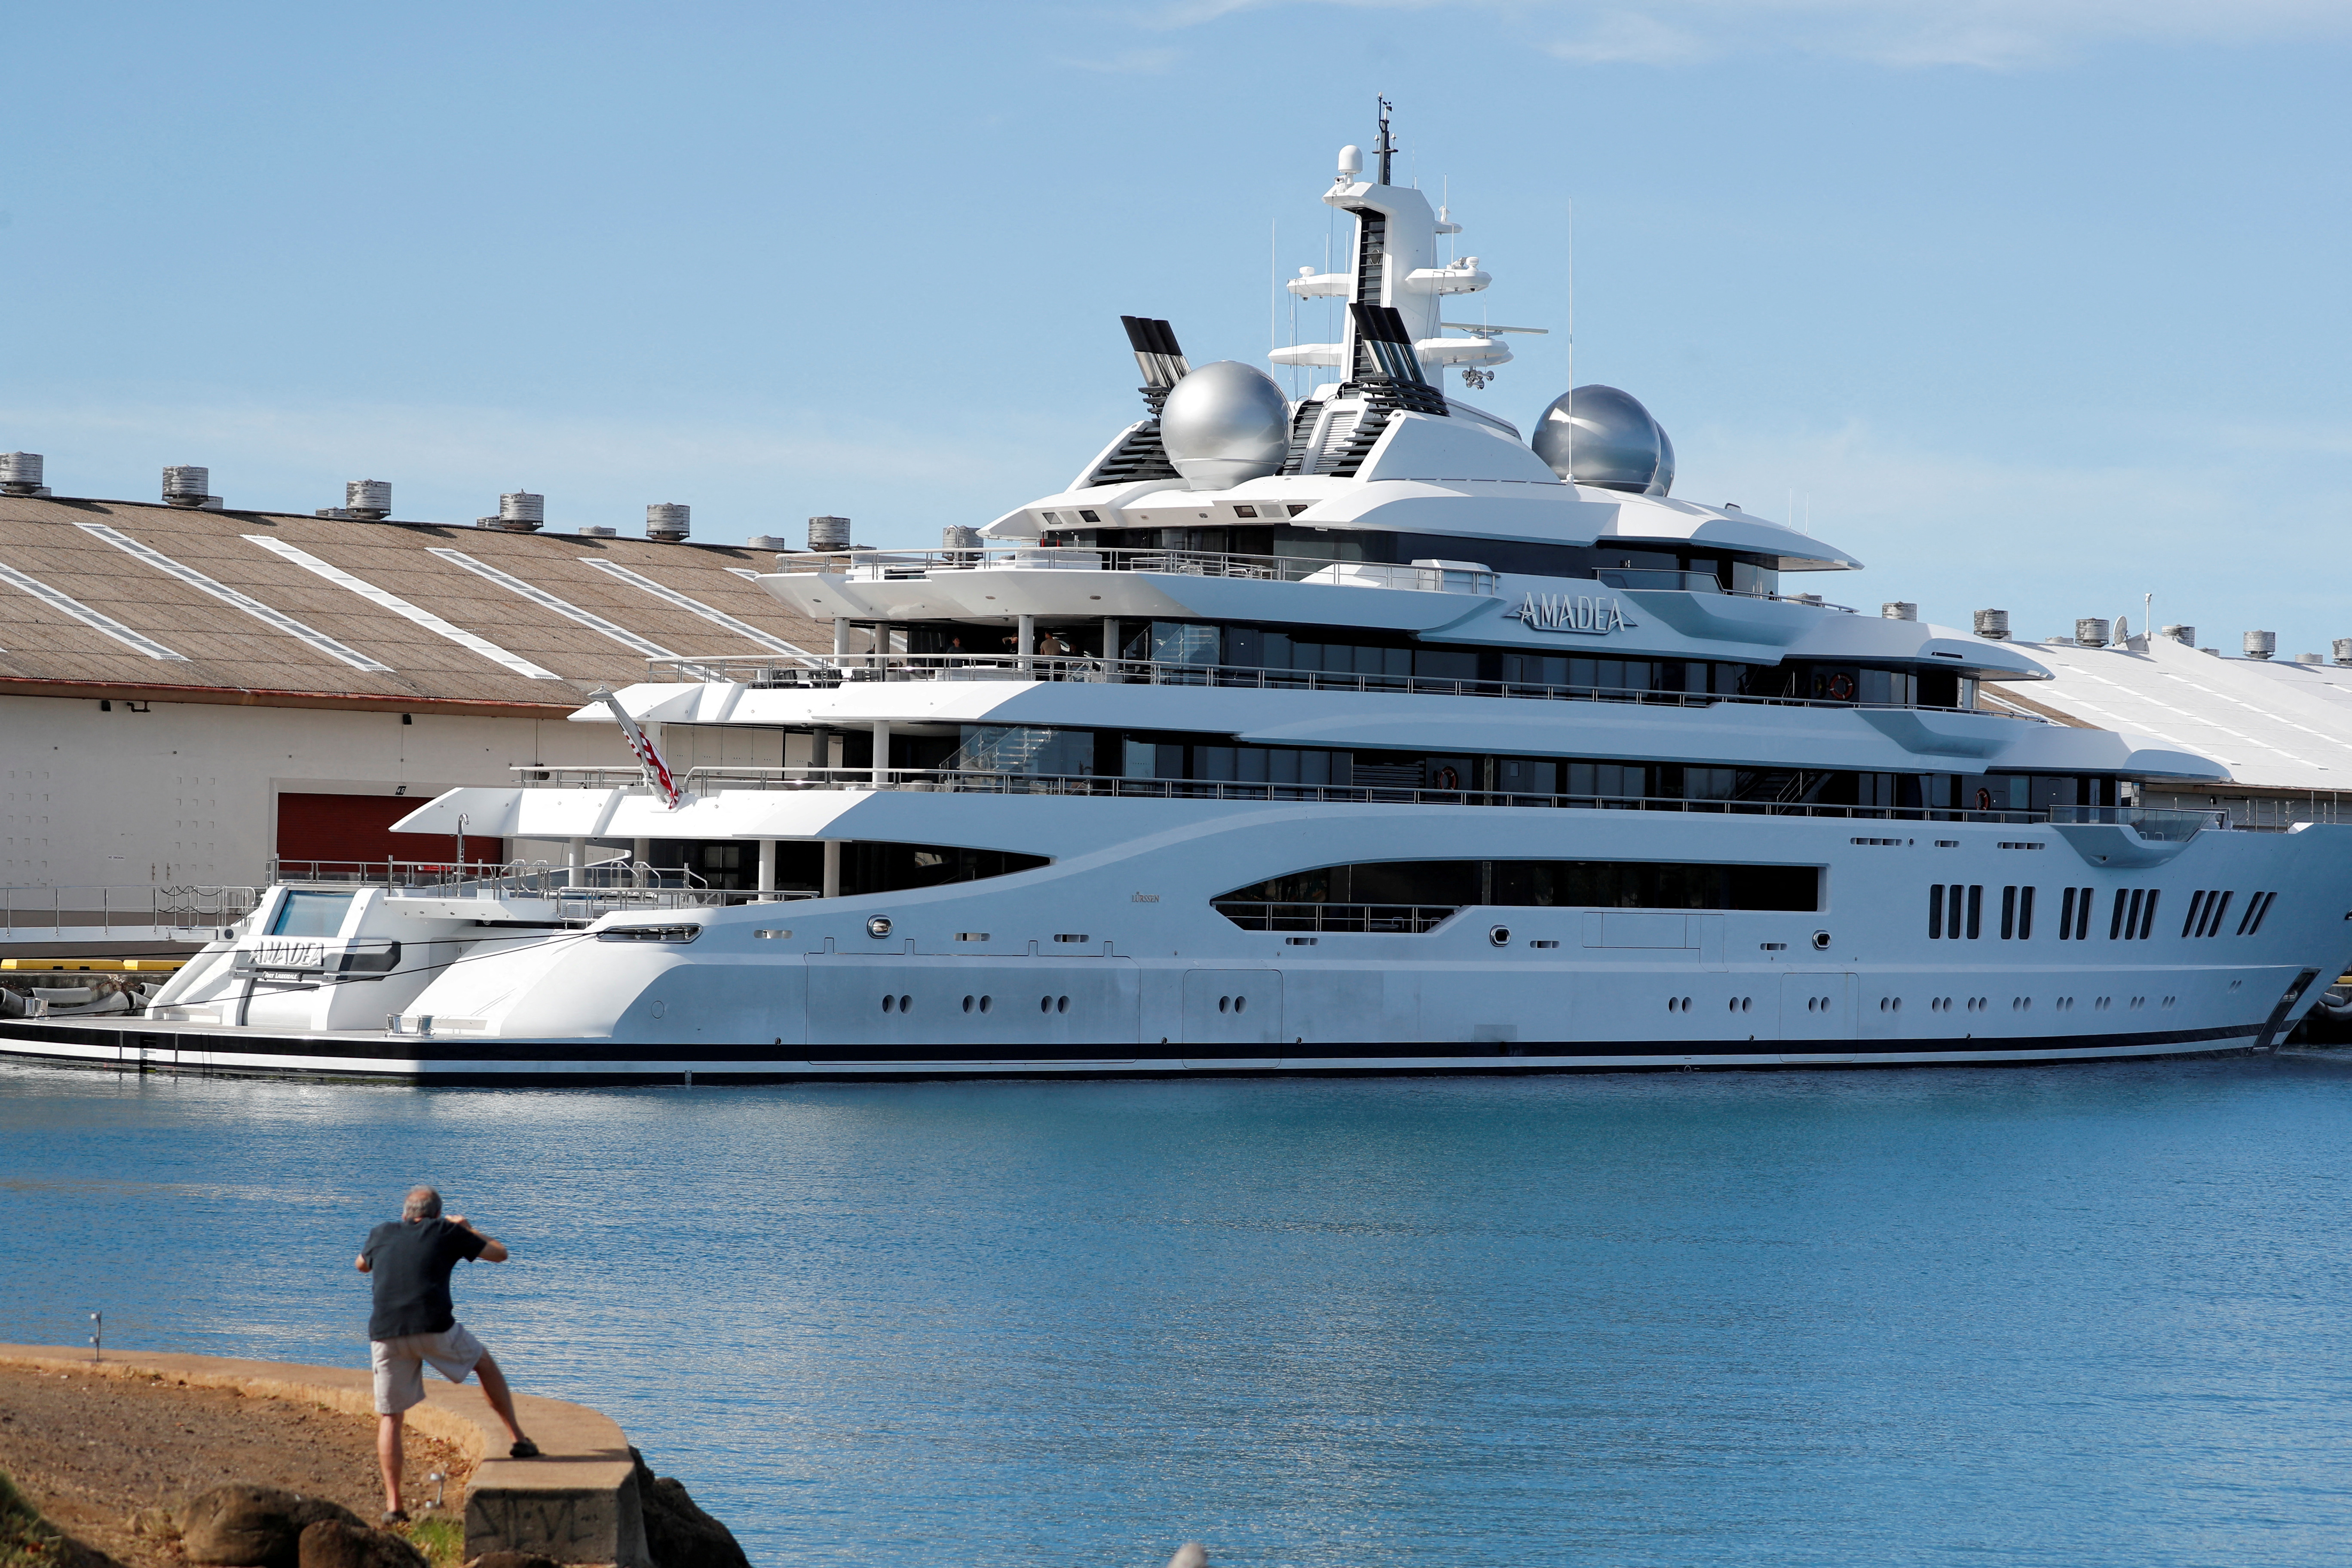 A man photographs the Russian-owned super yacht Amadea seized in Fiji by American law enforcement, in Honolulu